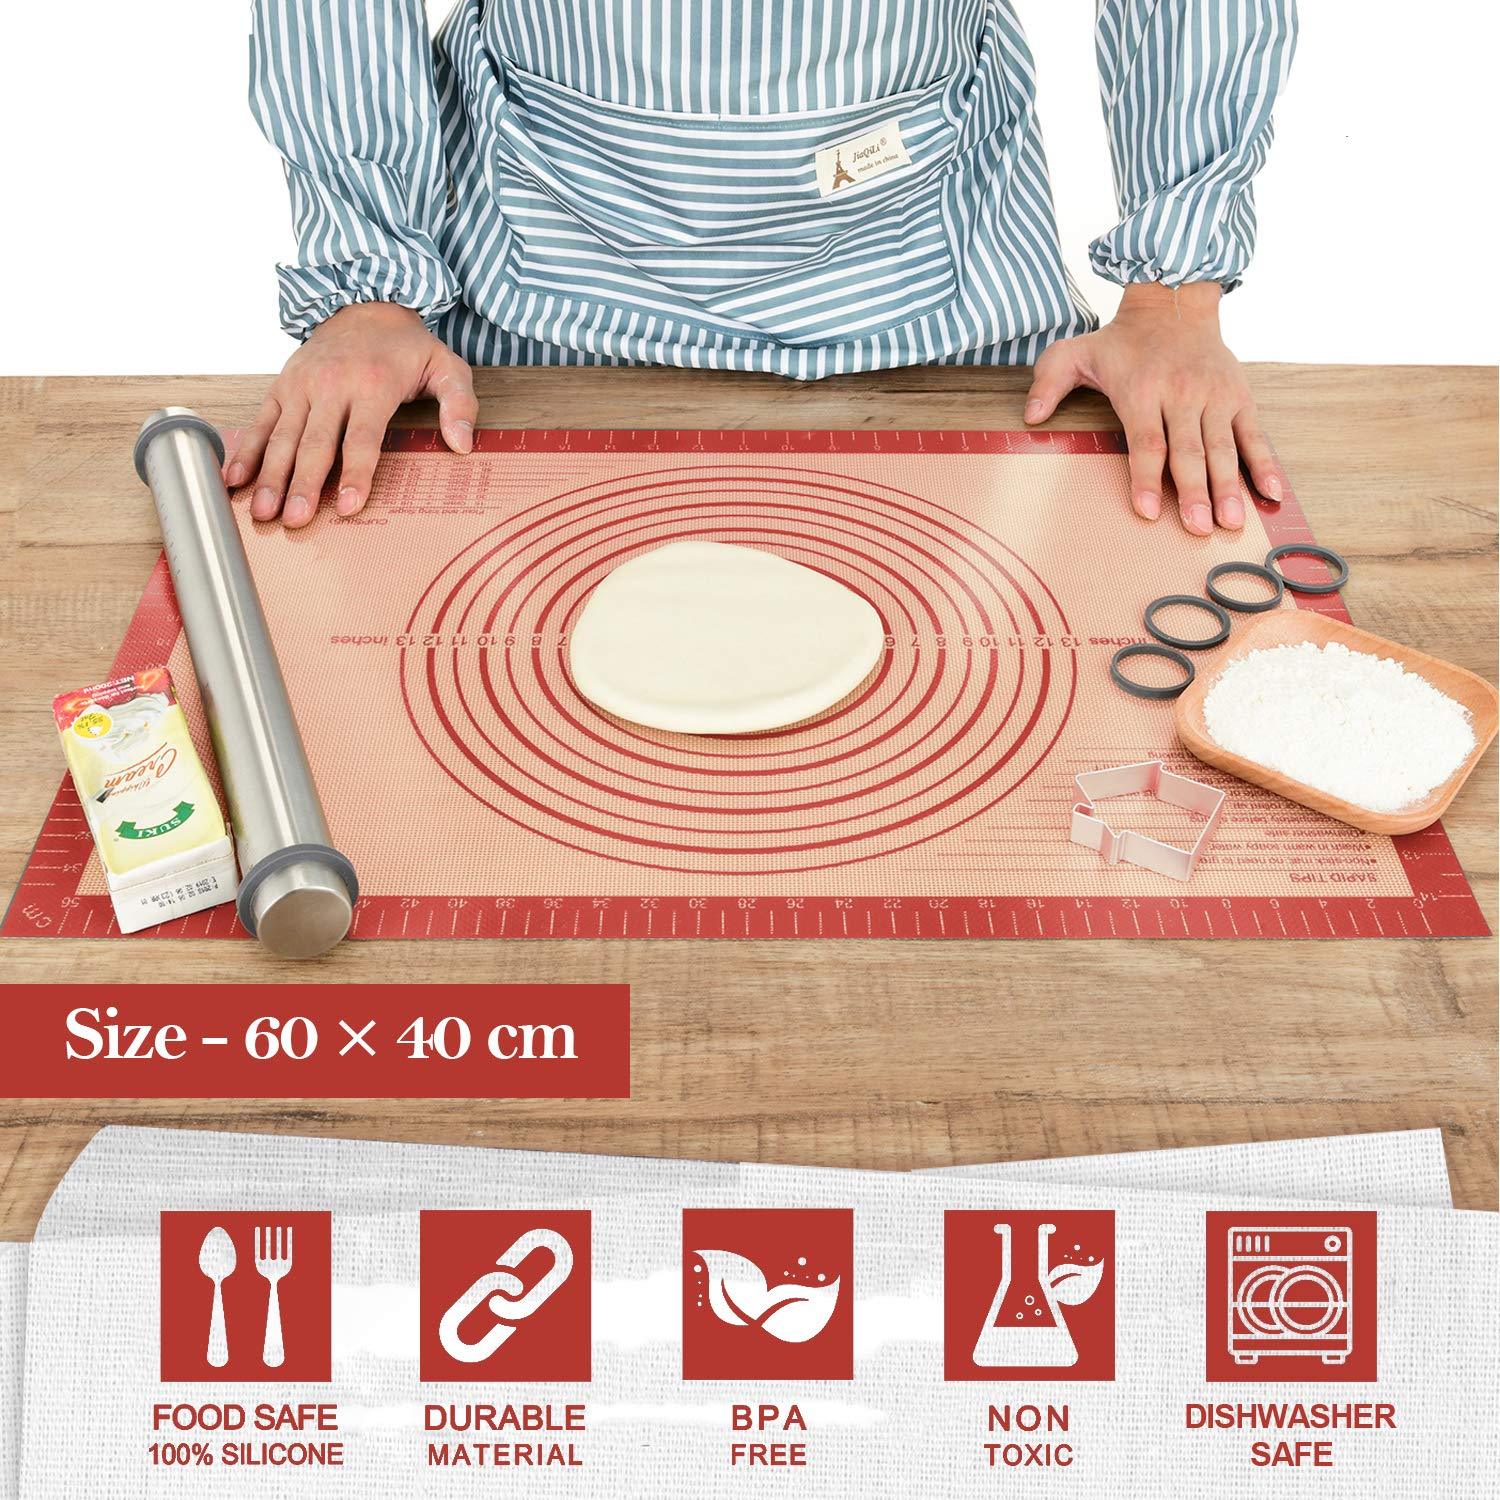 Extra Thick Silicone Pastry Mat Large for NonStick Baking Mat with Measurement，For Kneading mat,Fondant/Counter Pad, Dough Rolling Mat, Silicon Cookie Sheet, Pie Crust Bake Mat (16×24, Red) - CookCave